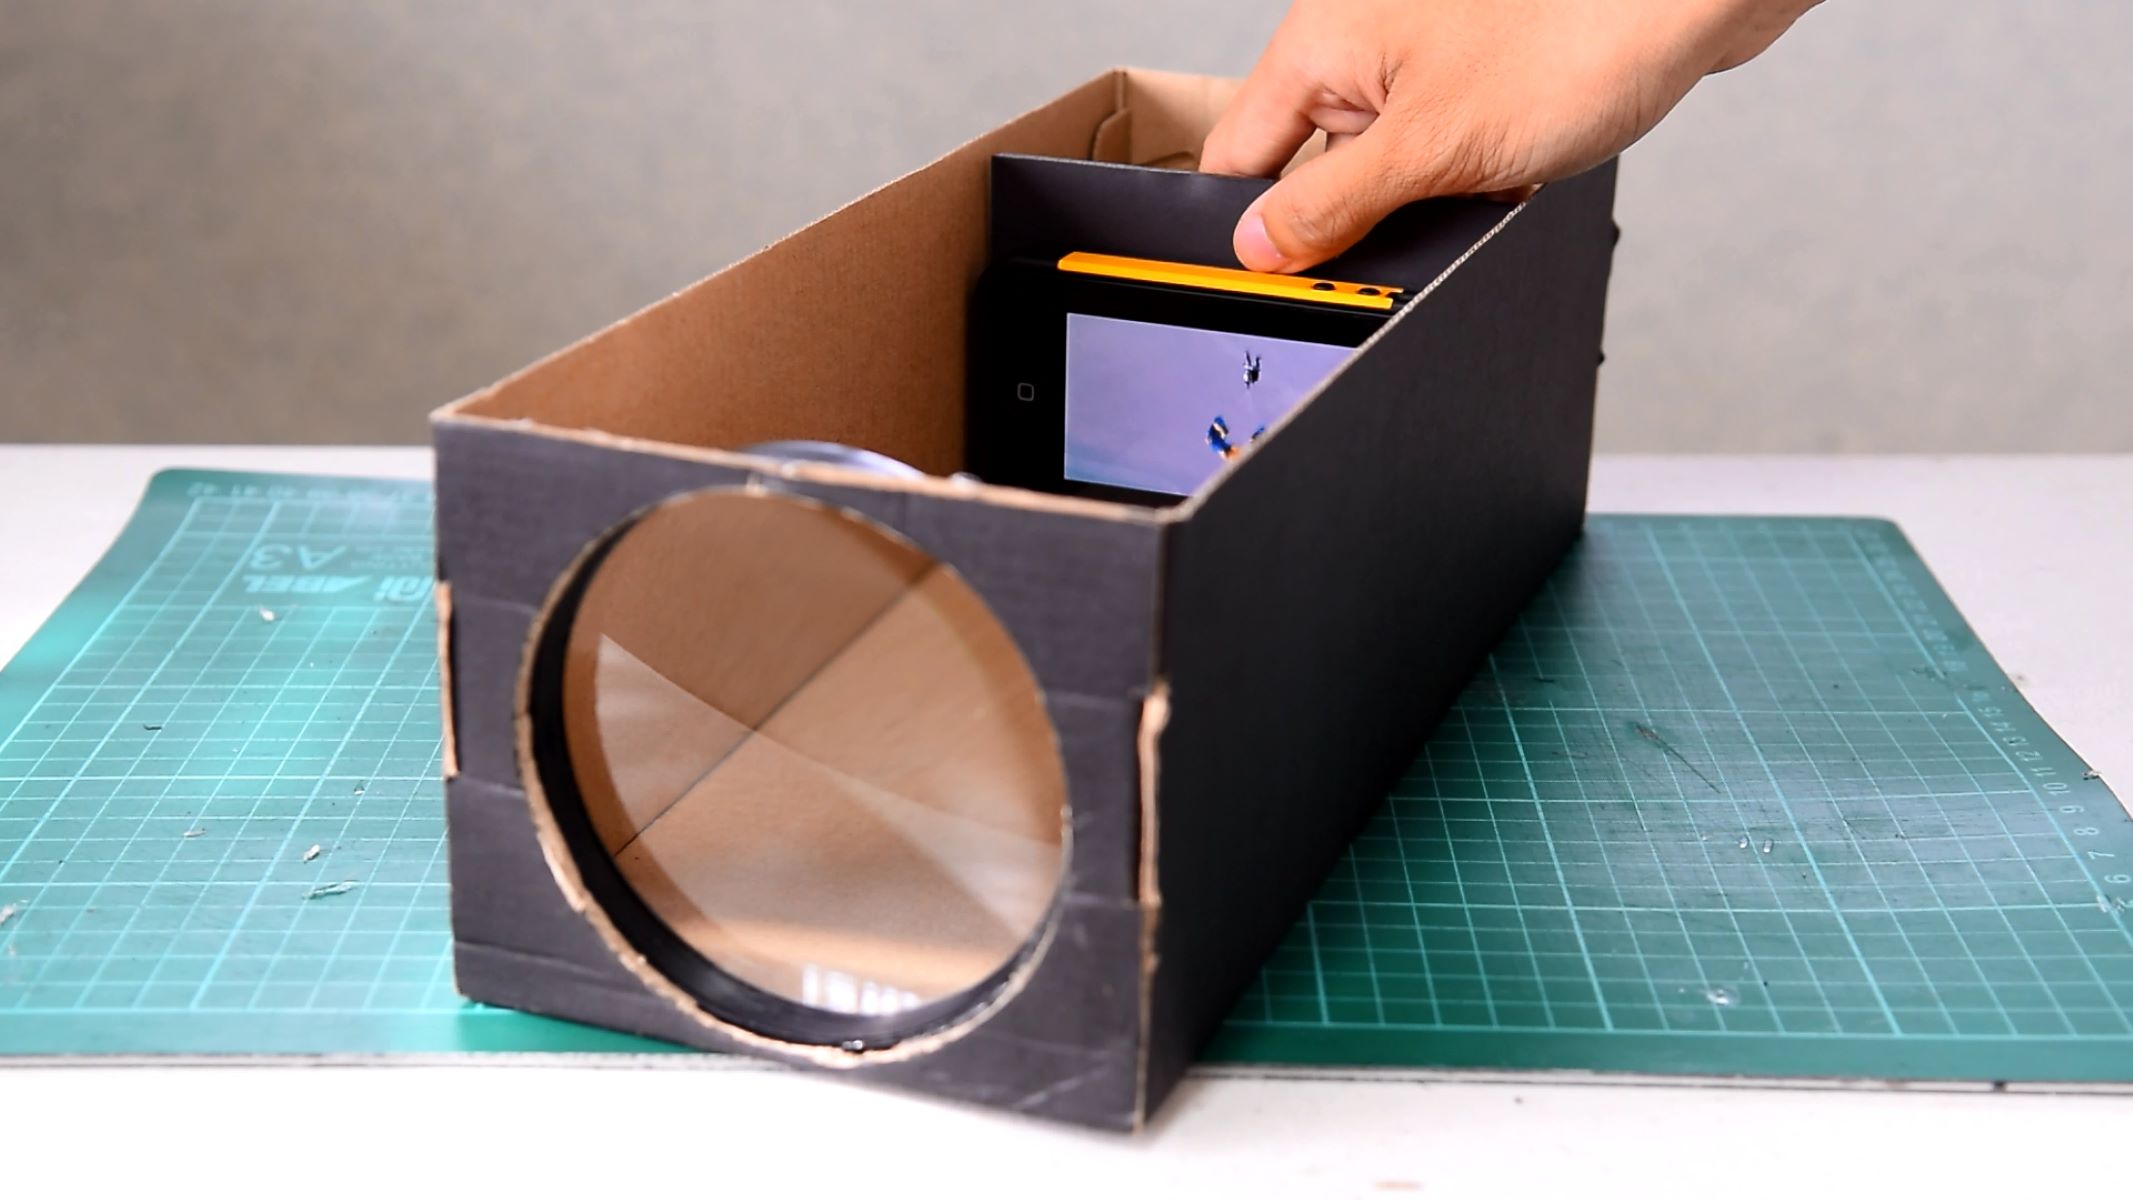 DIY Phone Projector: A Guide To Creating Your Own